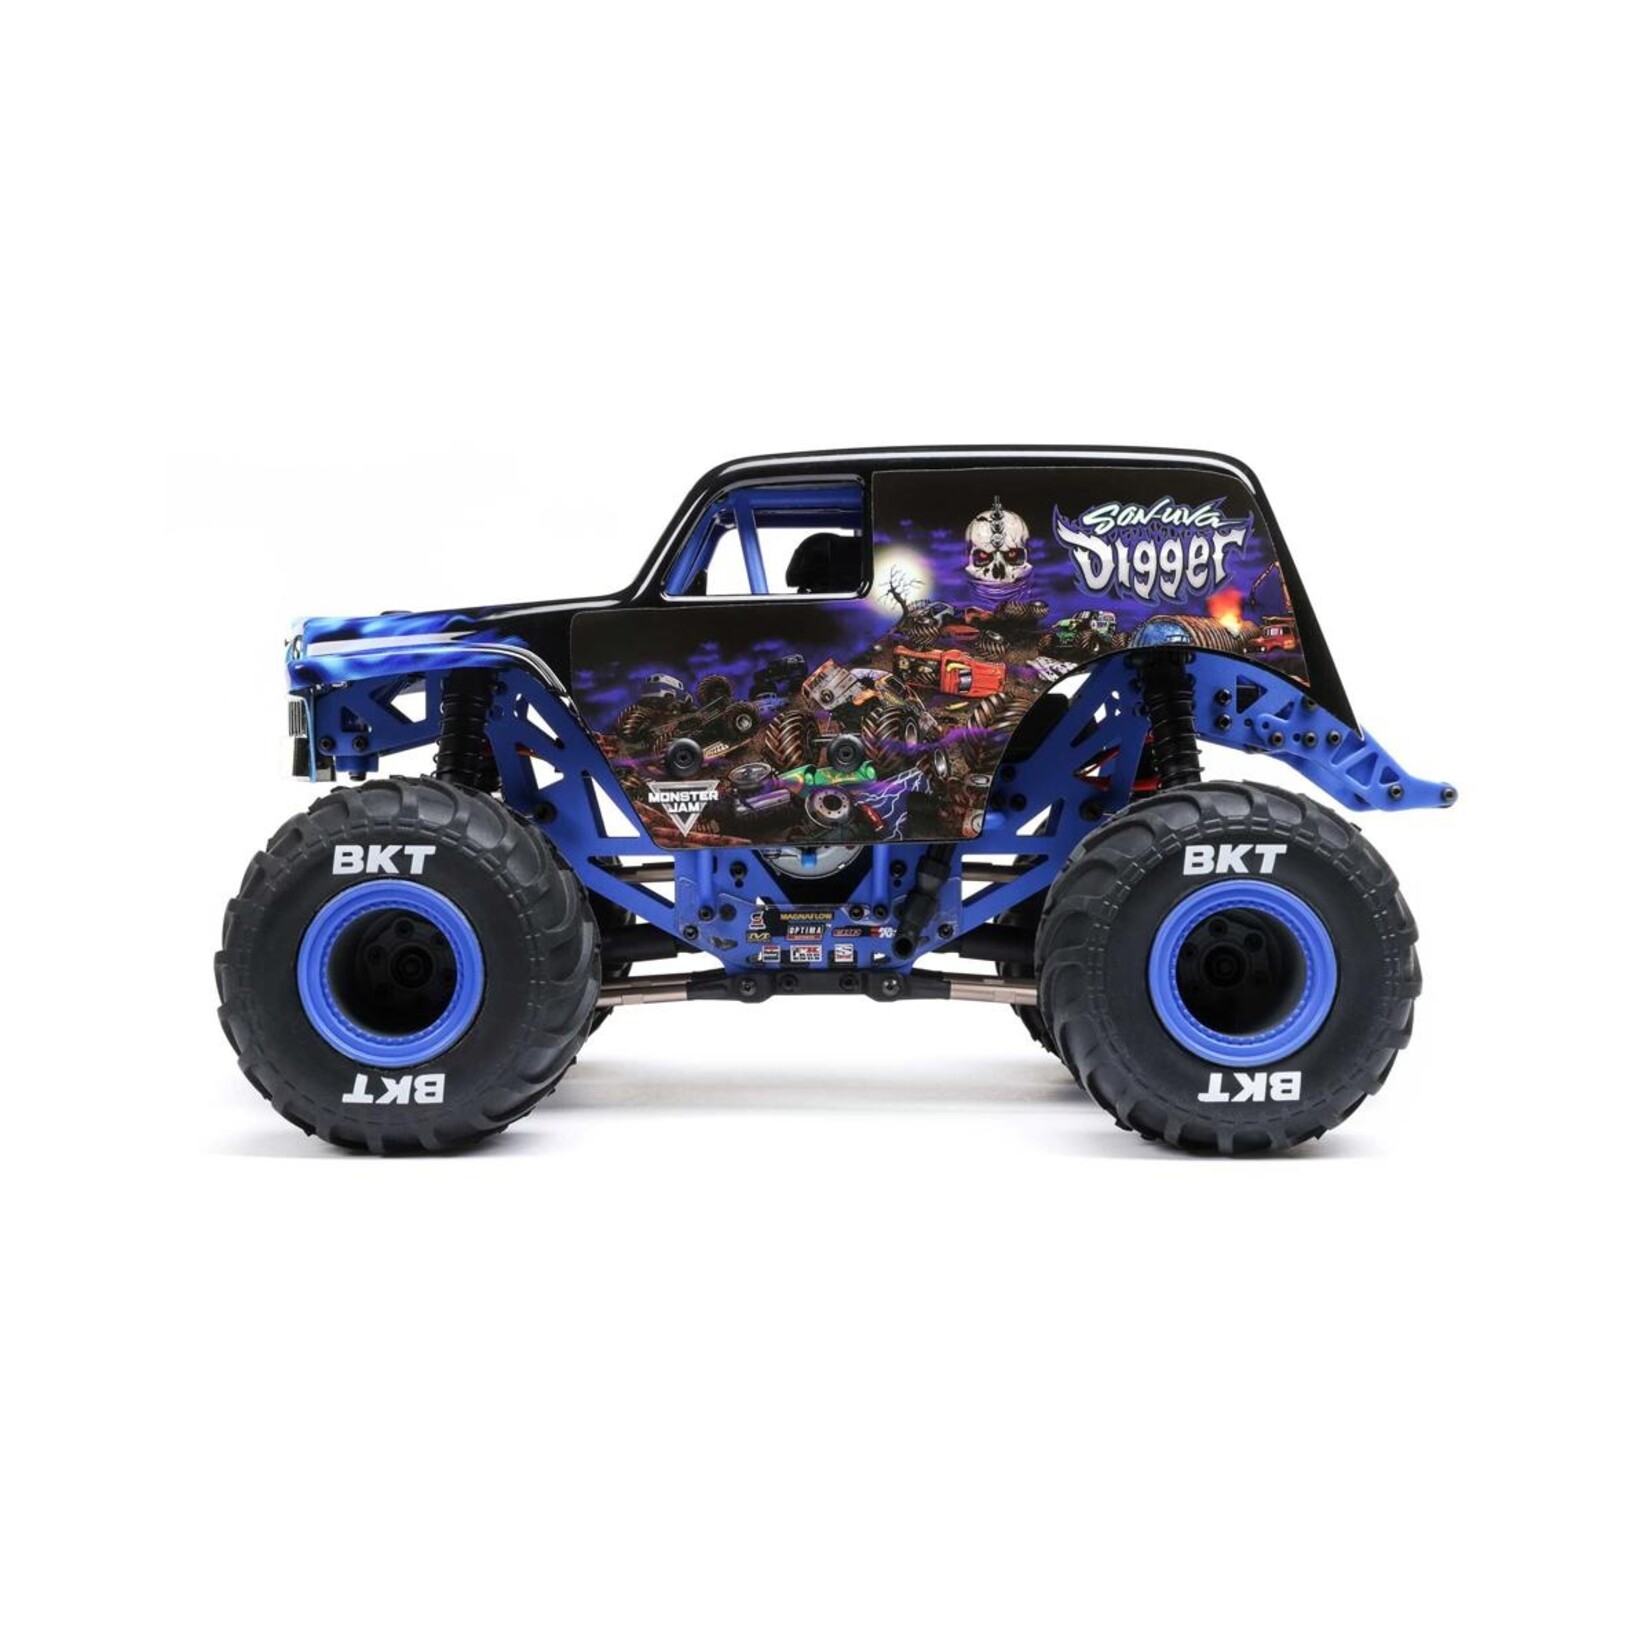 Losi Losi 1/18 Mini LMT 4X4 Brushed RTR Monster Truck (Son-Uva Digger) w/SLT2 2.4GHz Radio, Battery & Charger #LOS01026T2